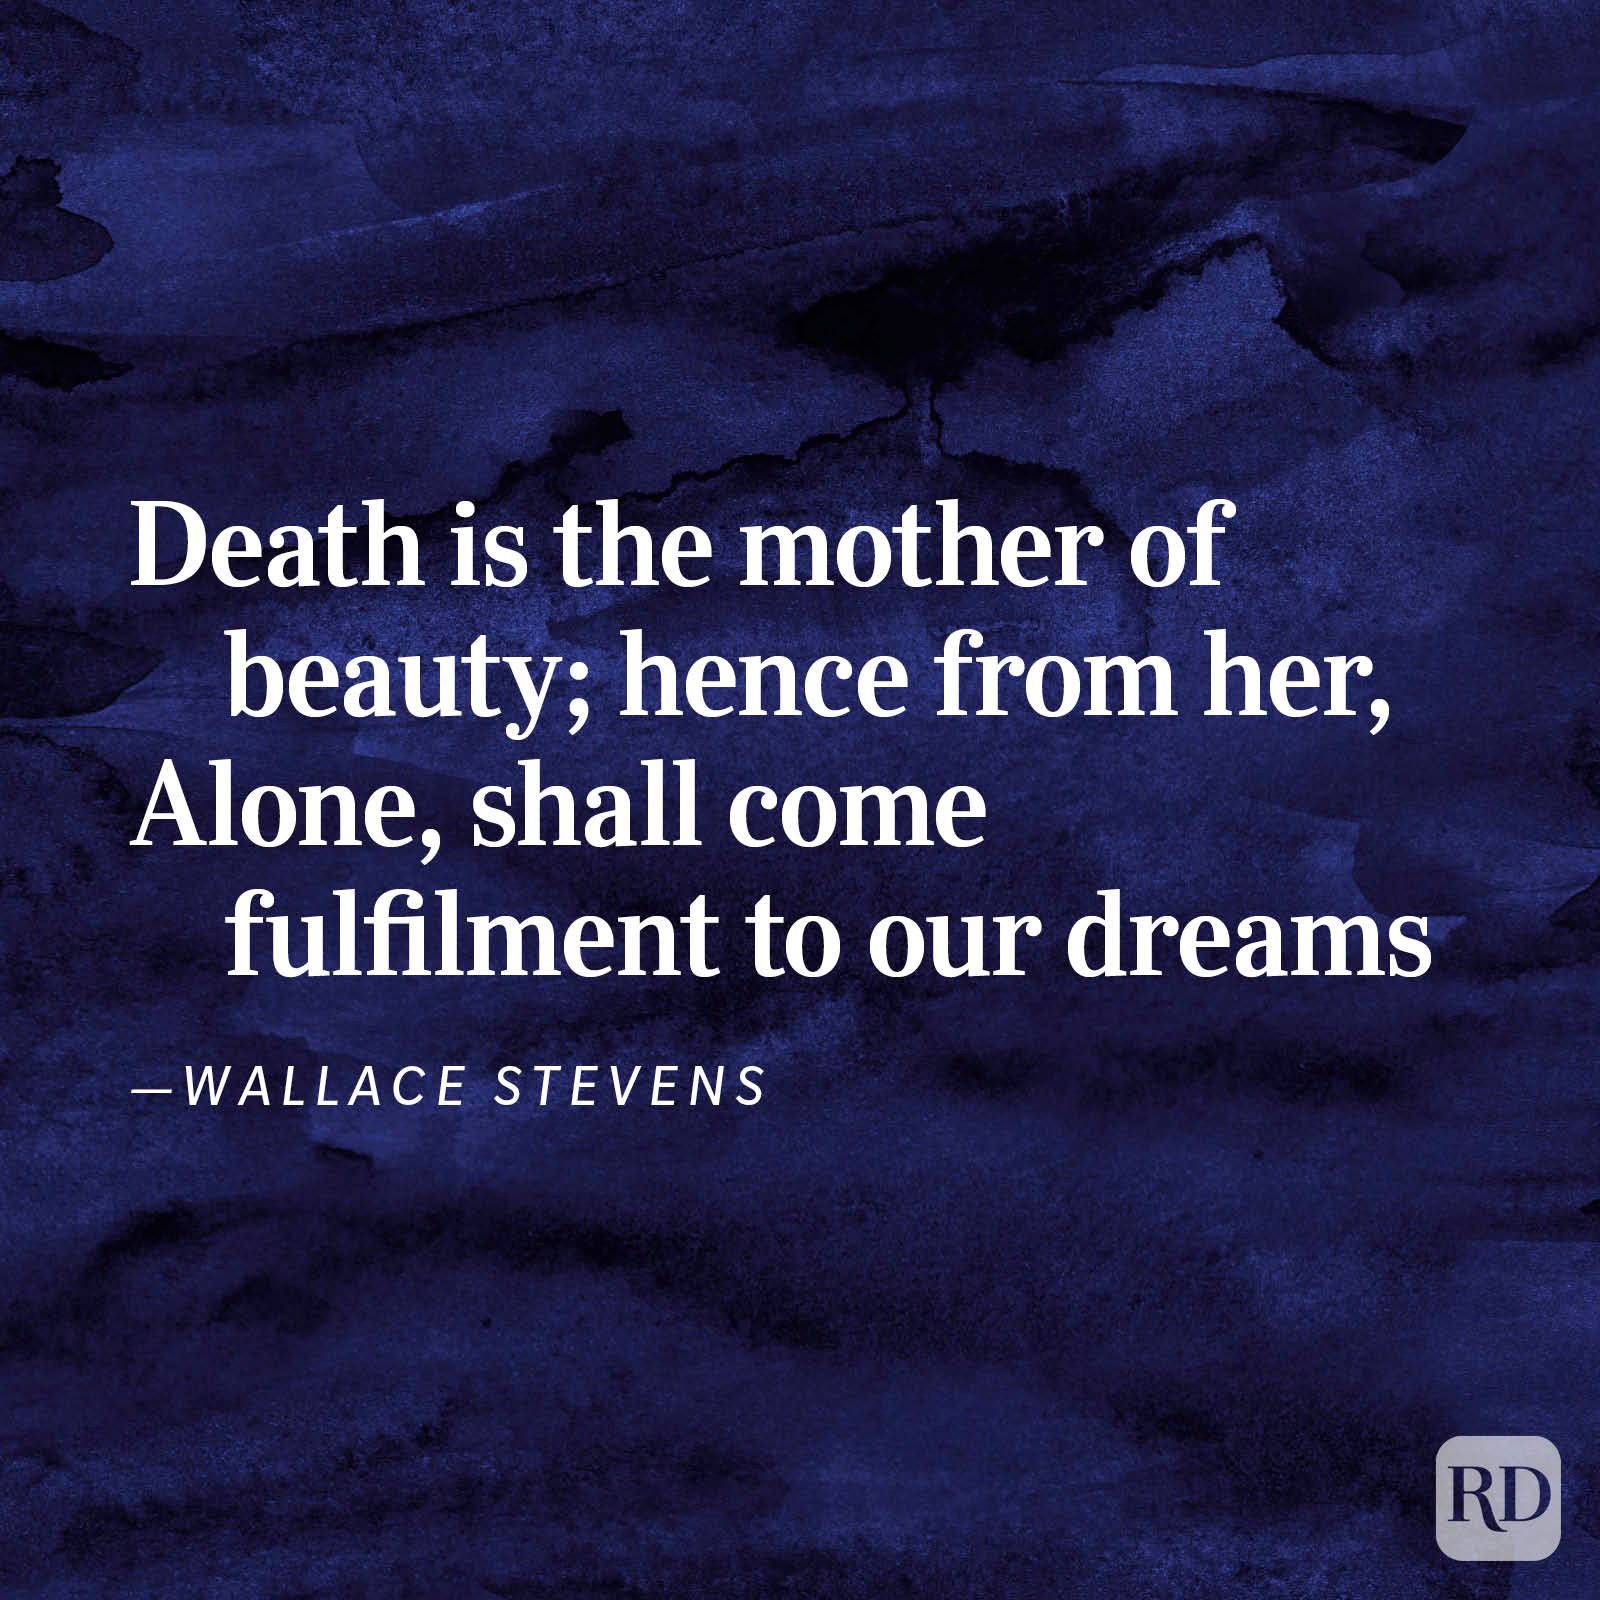 Funeral Poems To Honor Loved Ones